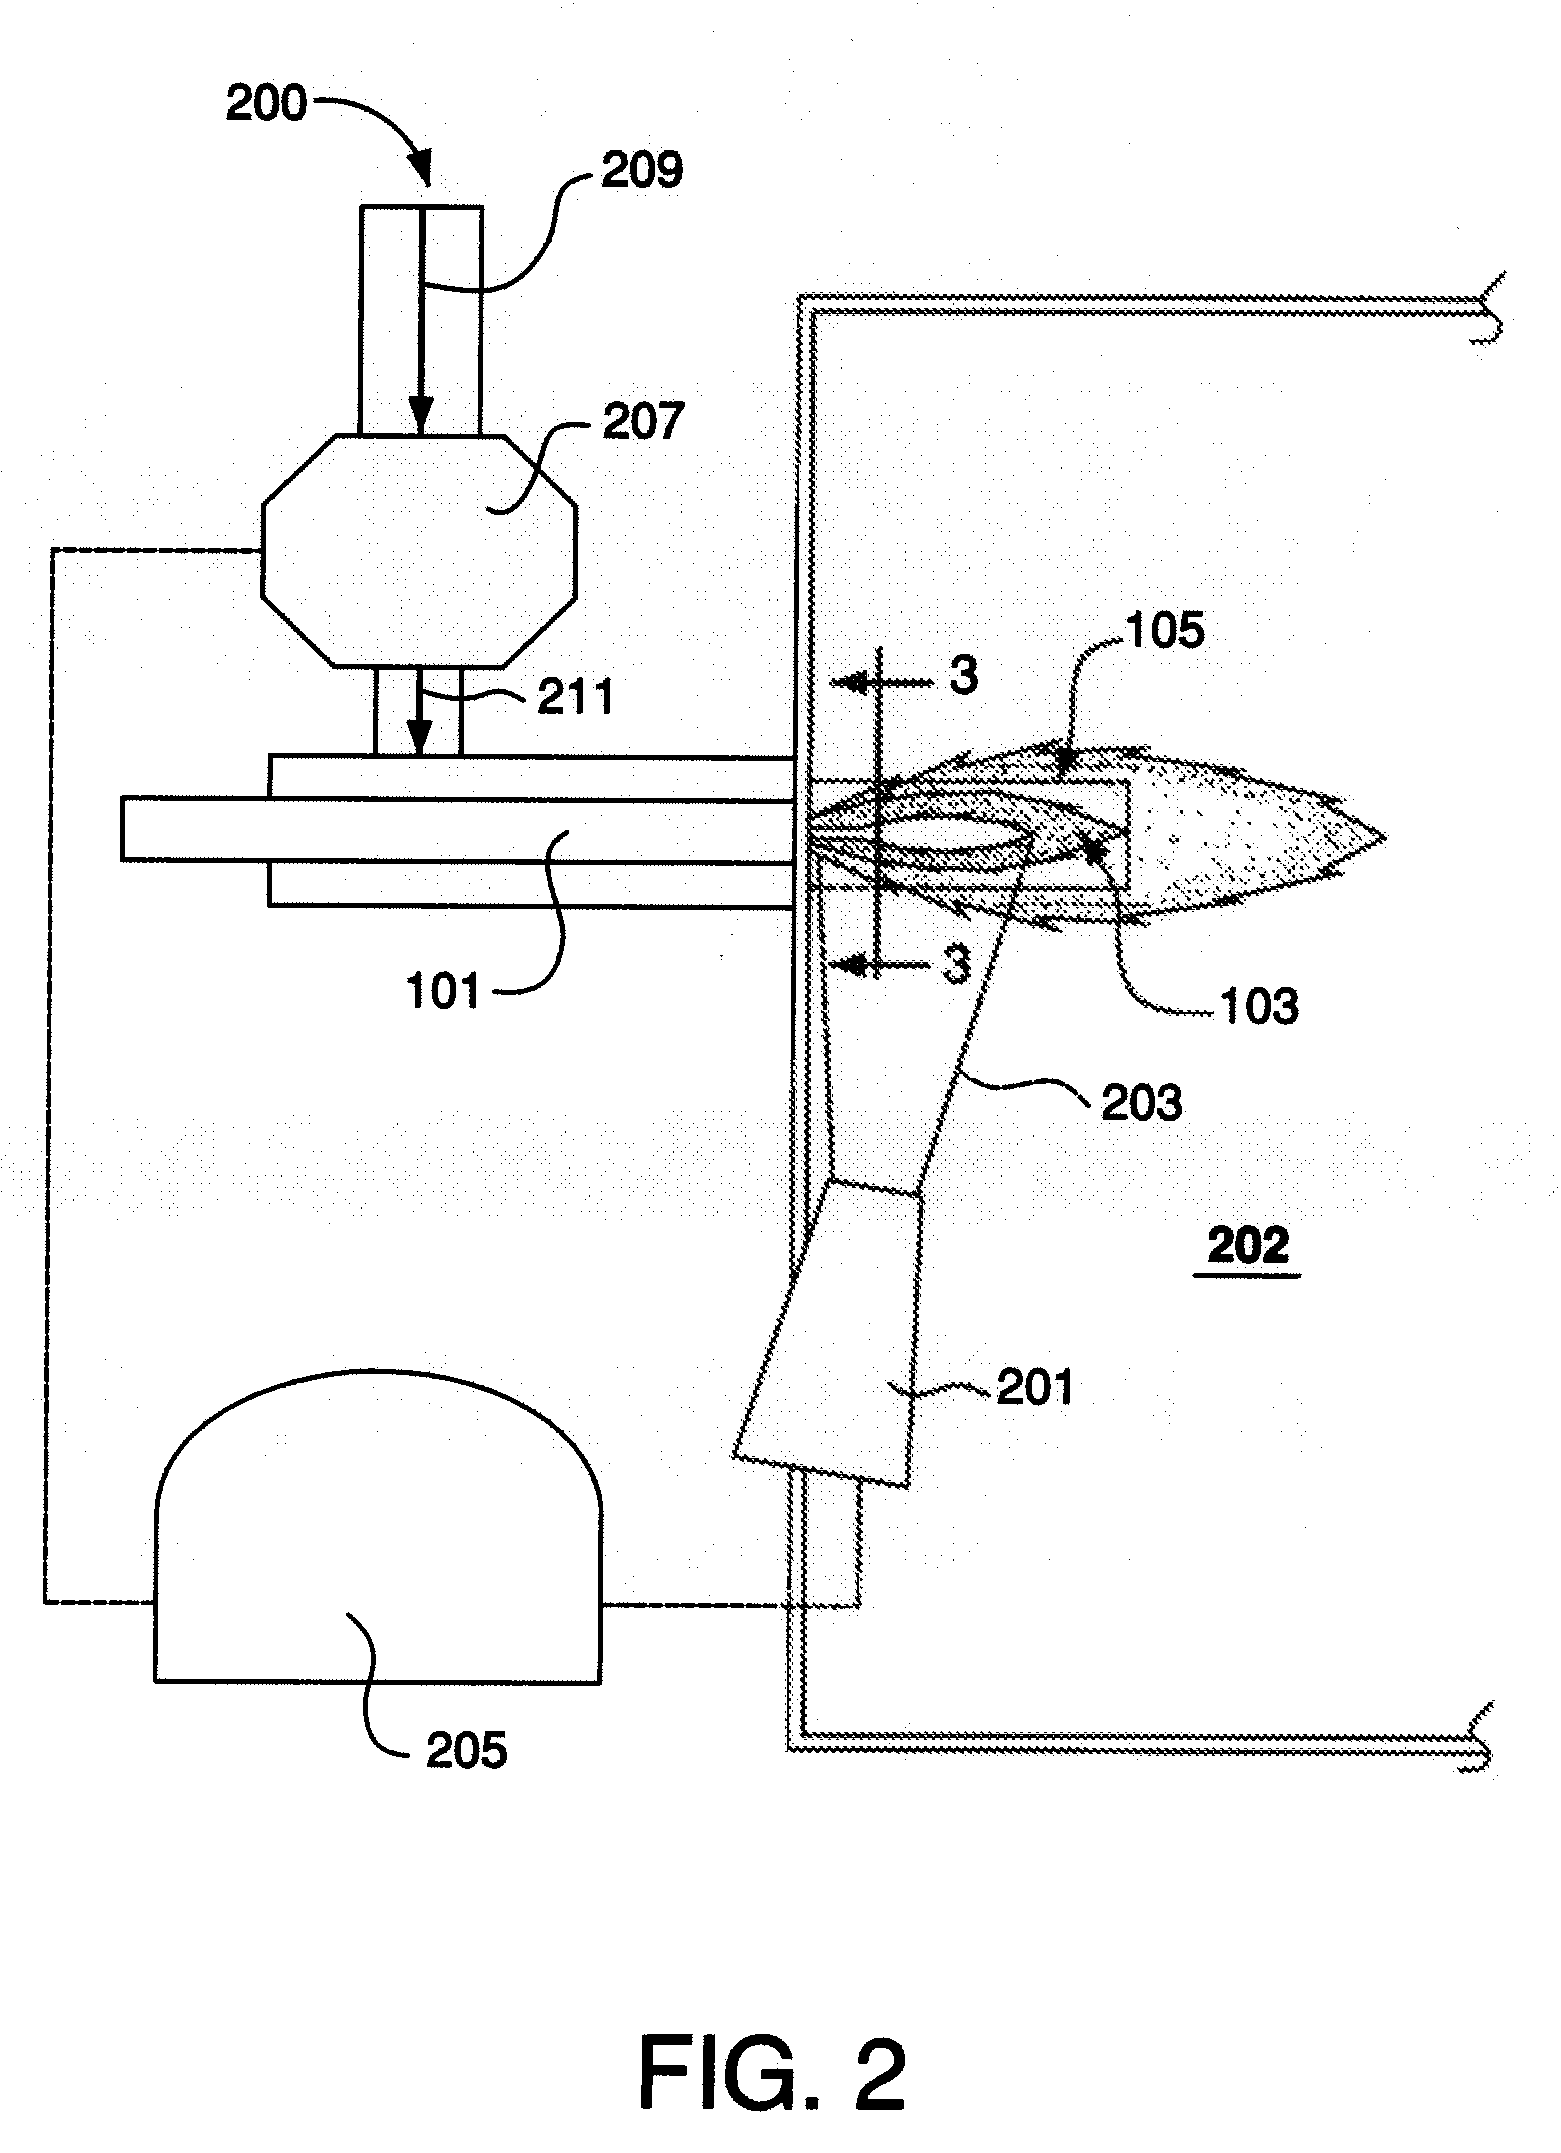 Oxygen control system for oxygen enhanced combustion of solid fuels